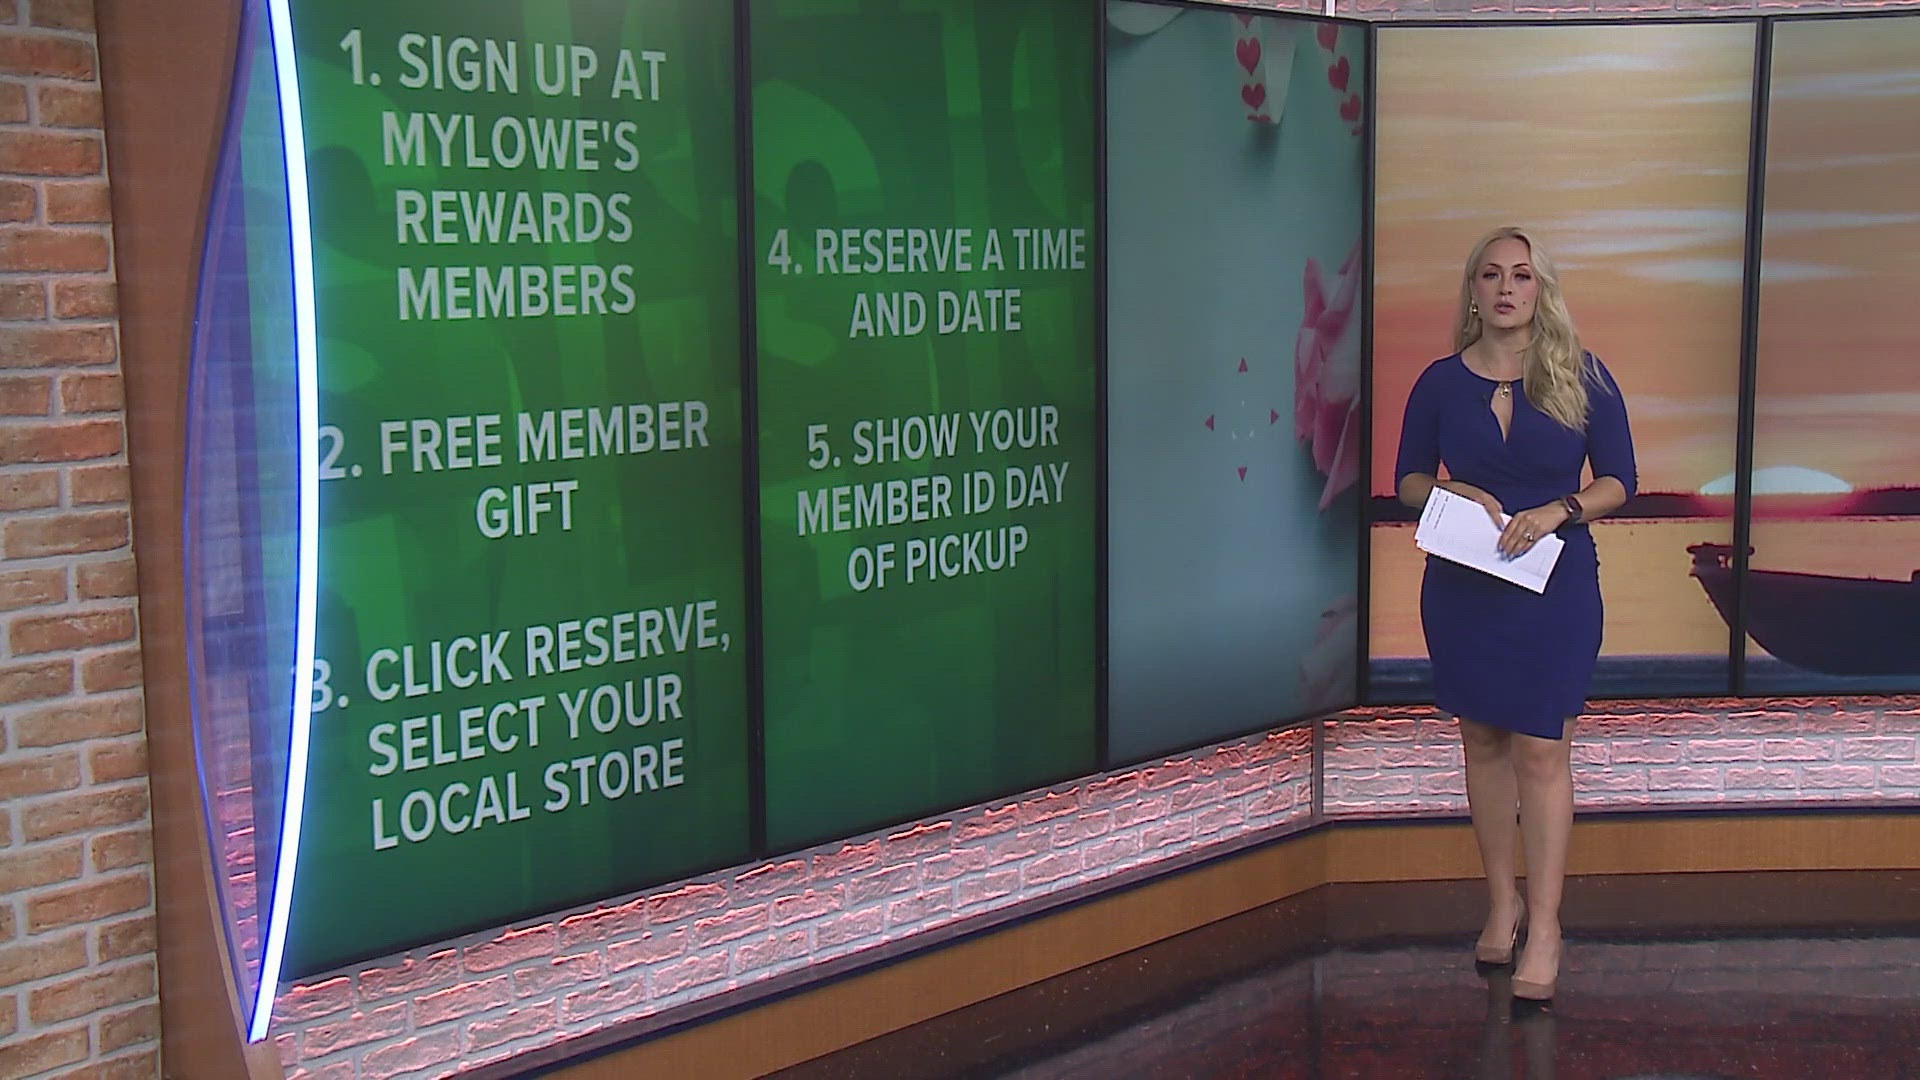 WWL Louisiana's Brheanna Boudreaux breaks down how you can get a free plant for Mom for Mother's Day, and what to watch for with Buy now Pay later.